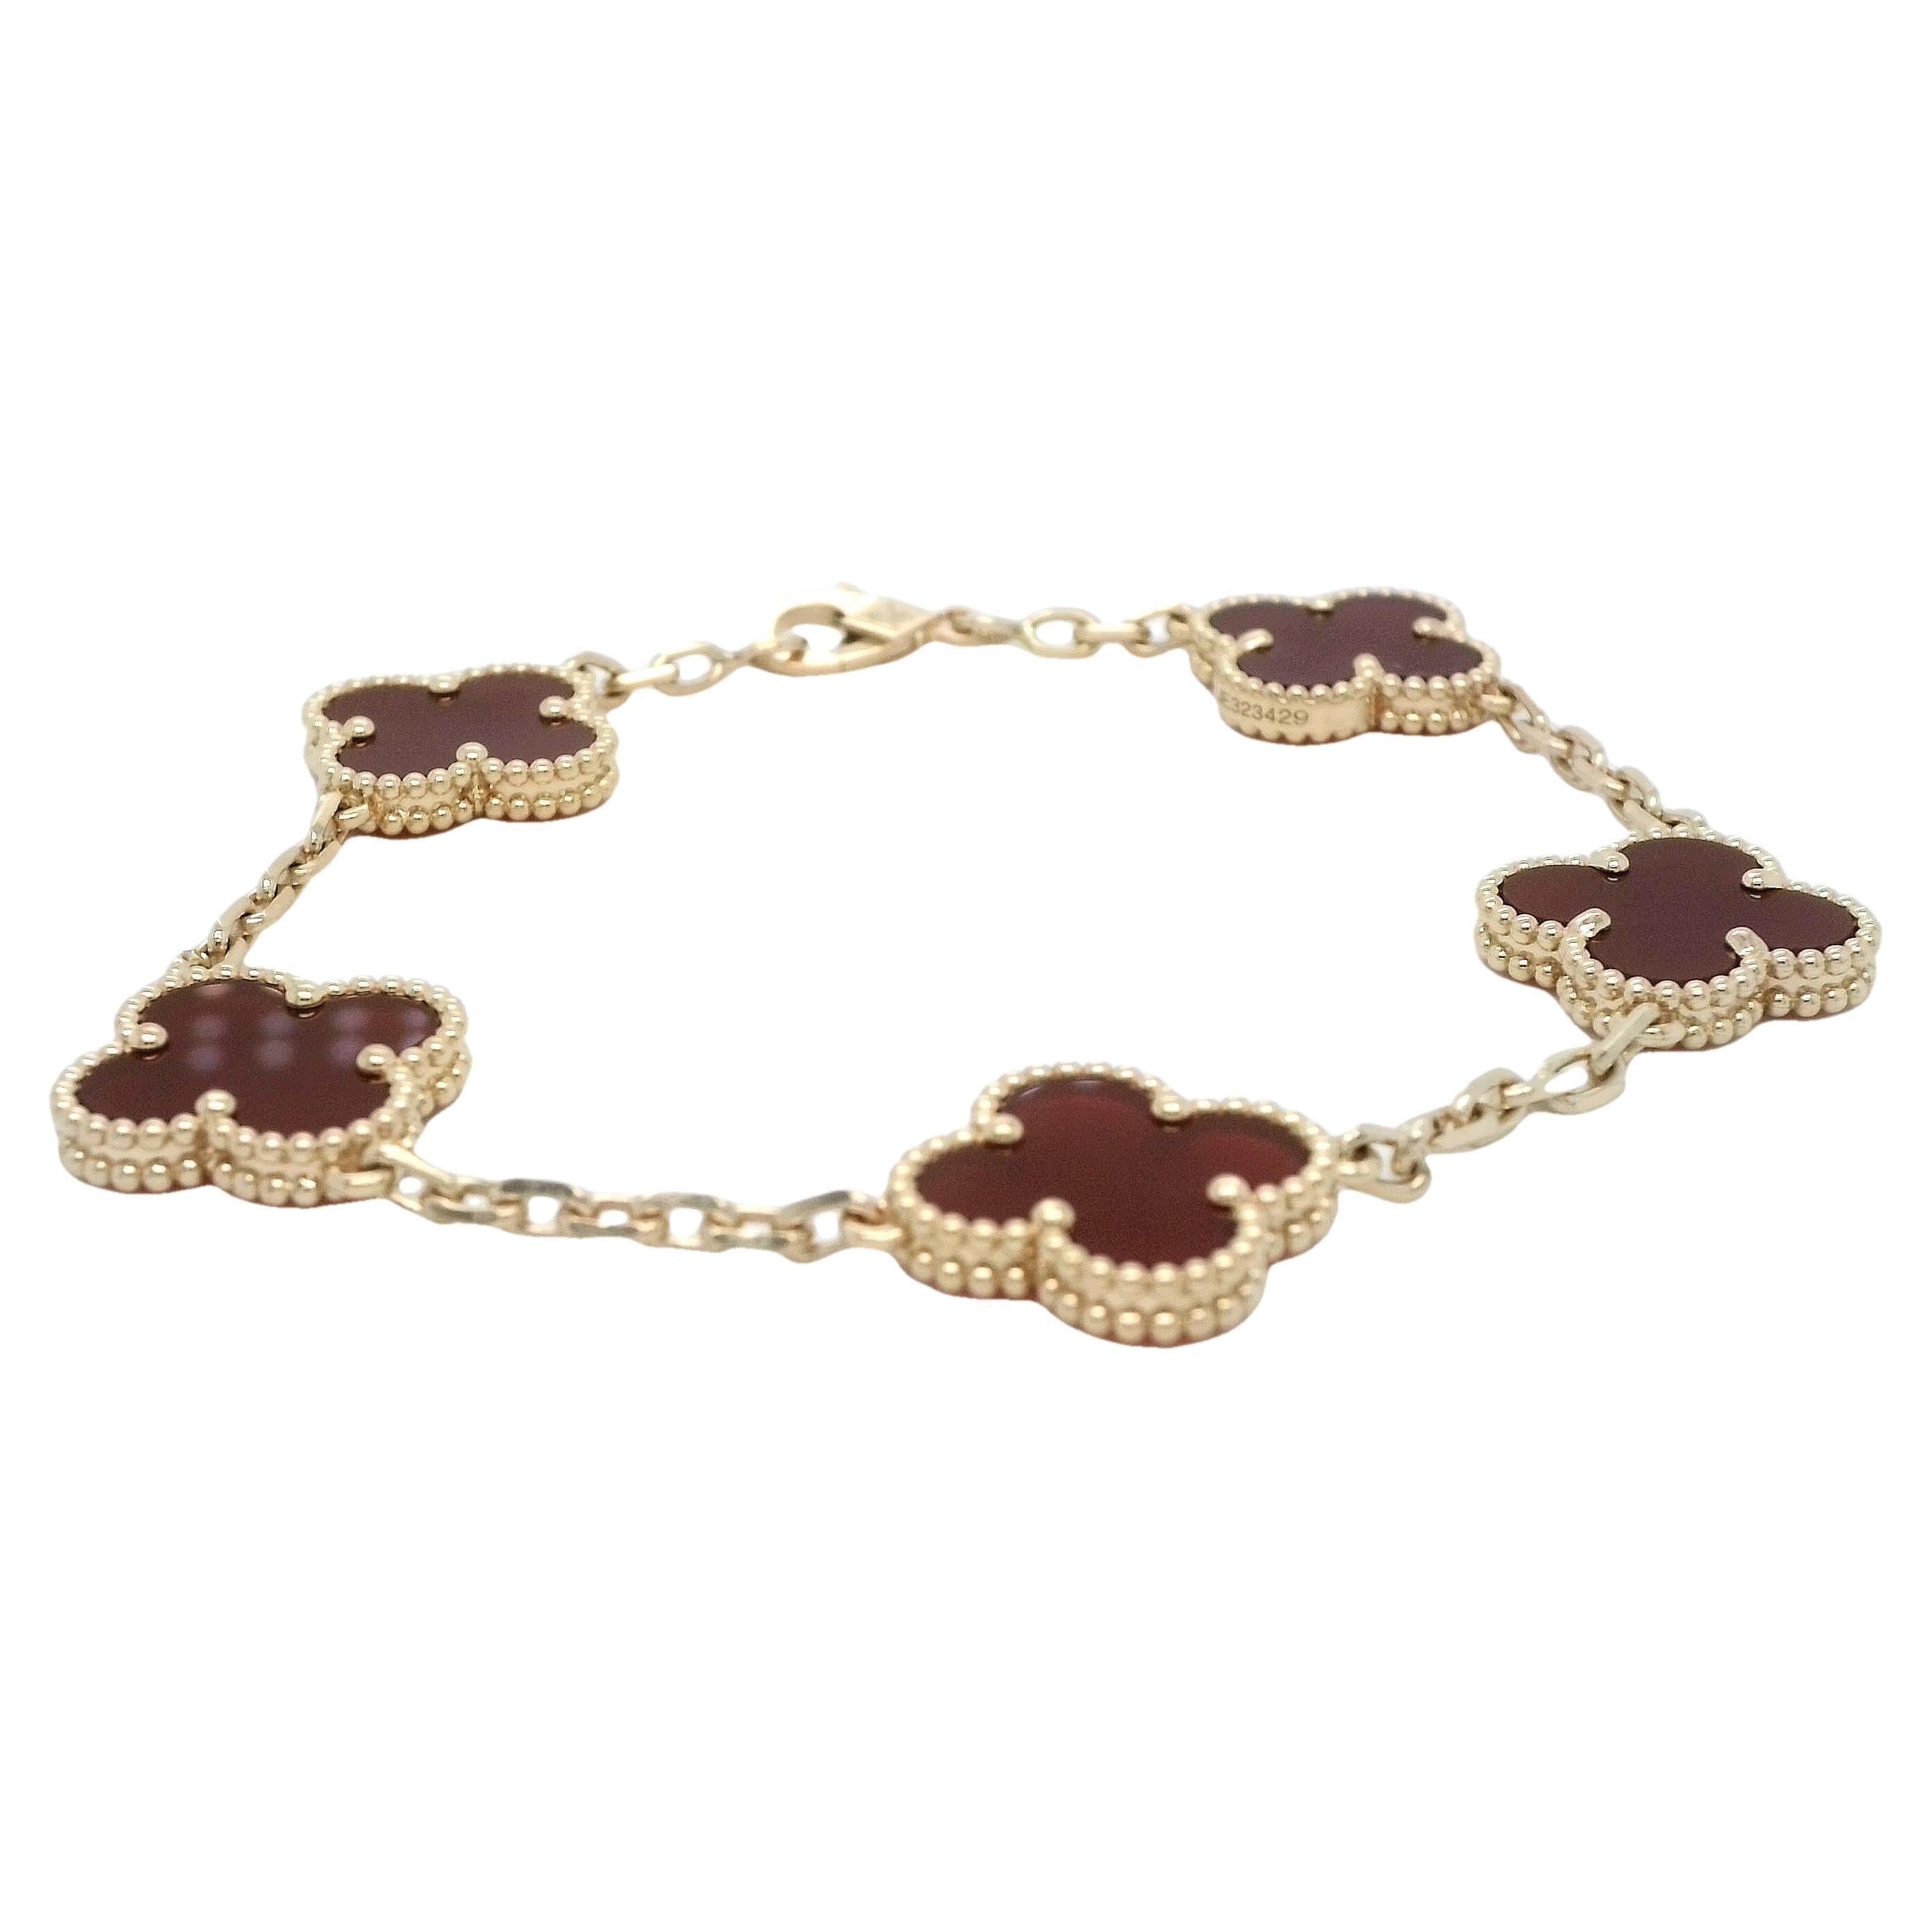 Van Cleef & Arpels Carnelian bracelet VCARD35500
VCA signature design, first created in 1968, this timeless collection brings luck to each owner by its clover leaf. 
An iconic collection, the Alhambra is a symbol of luck, with a border of golden